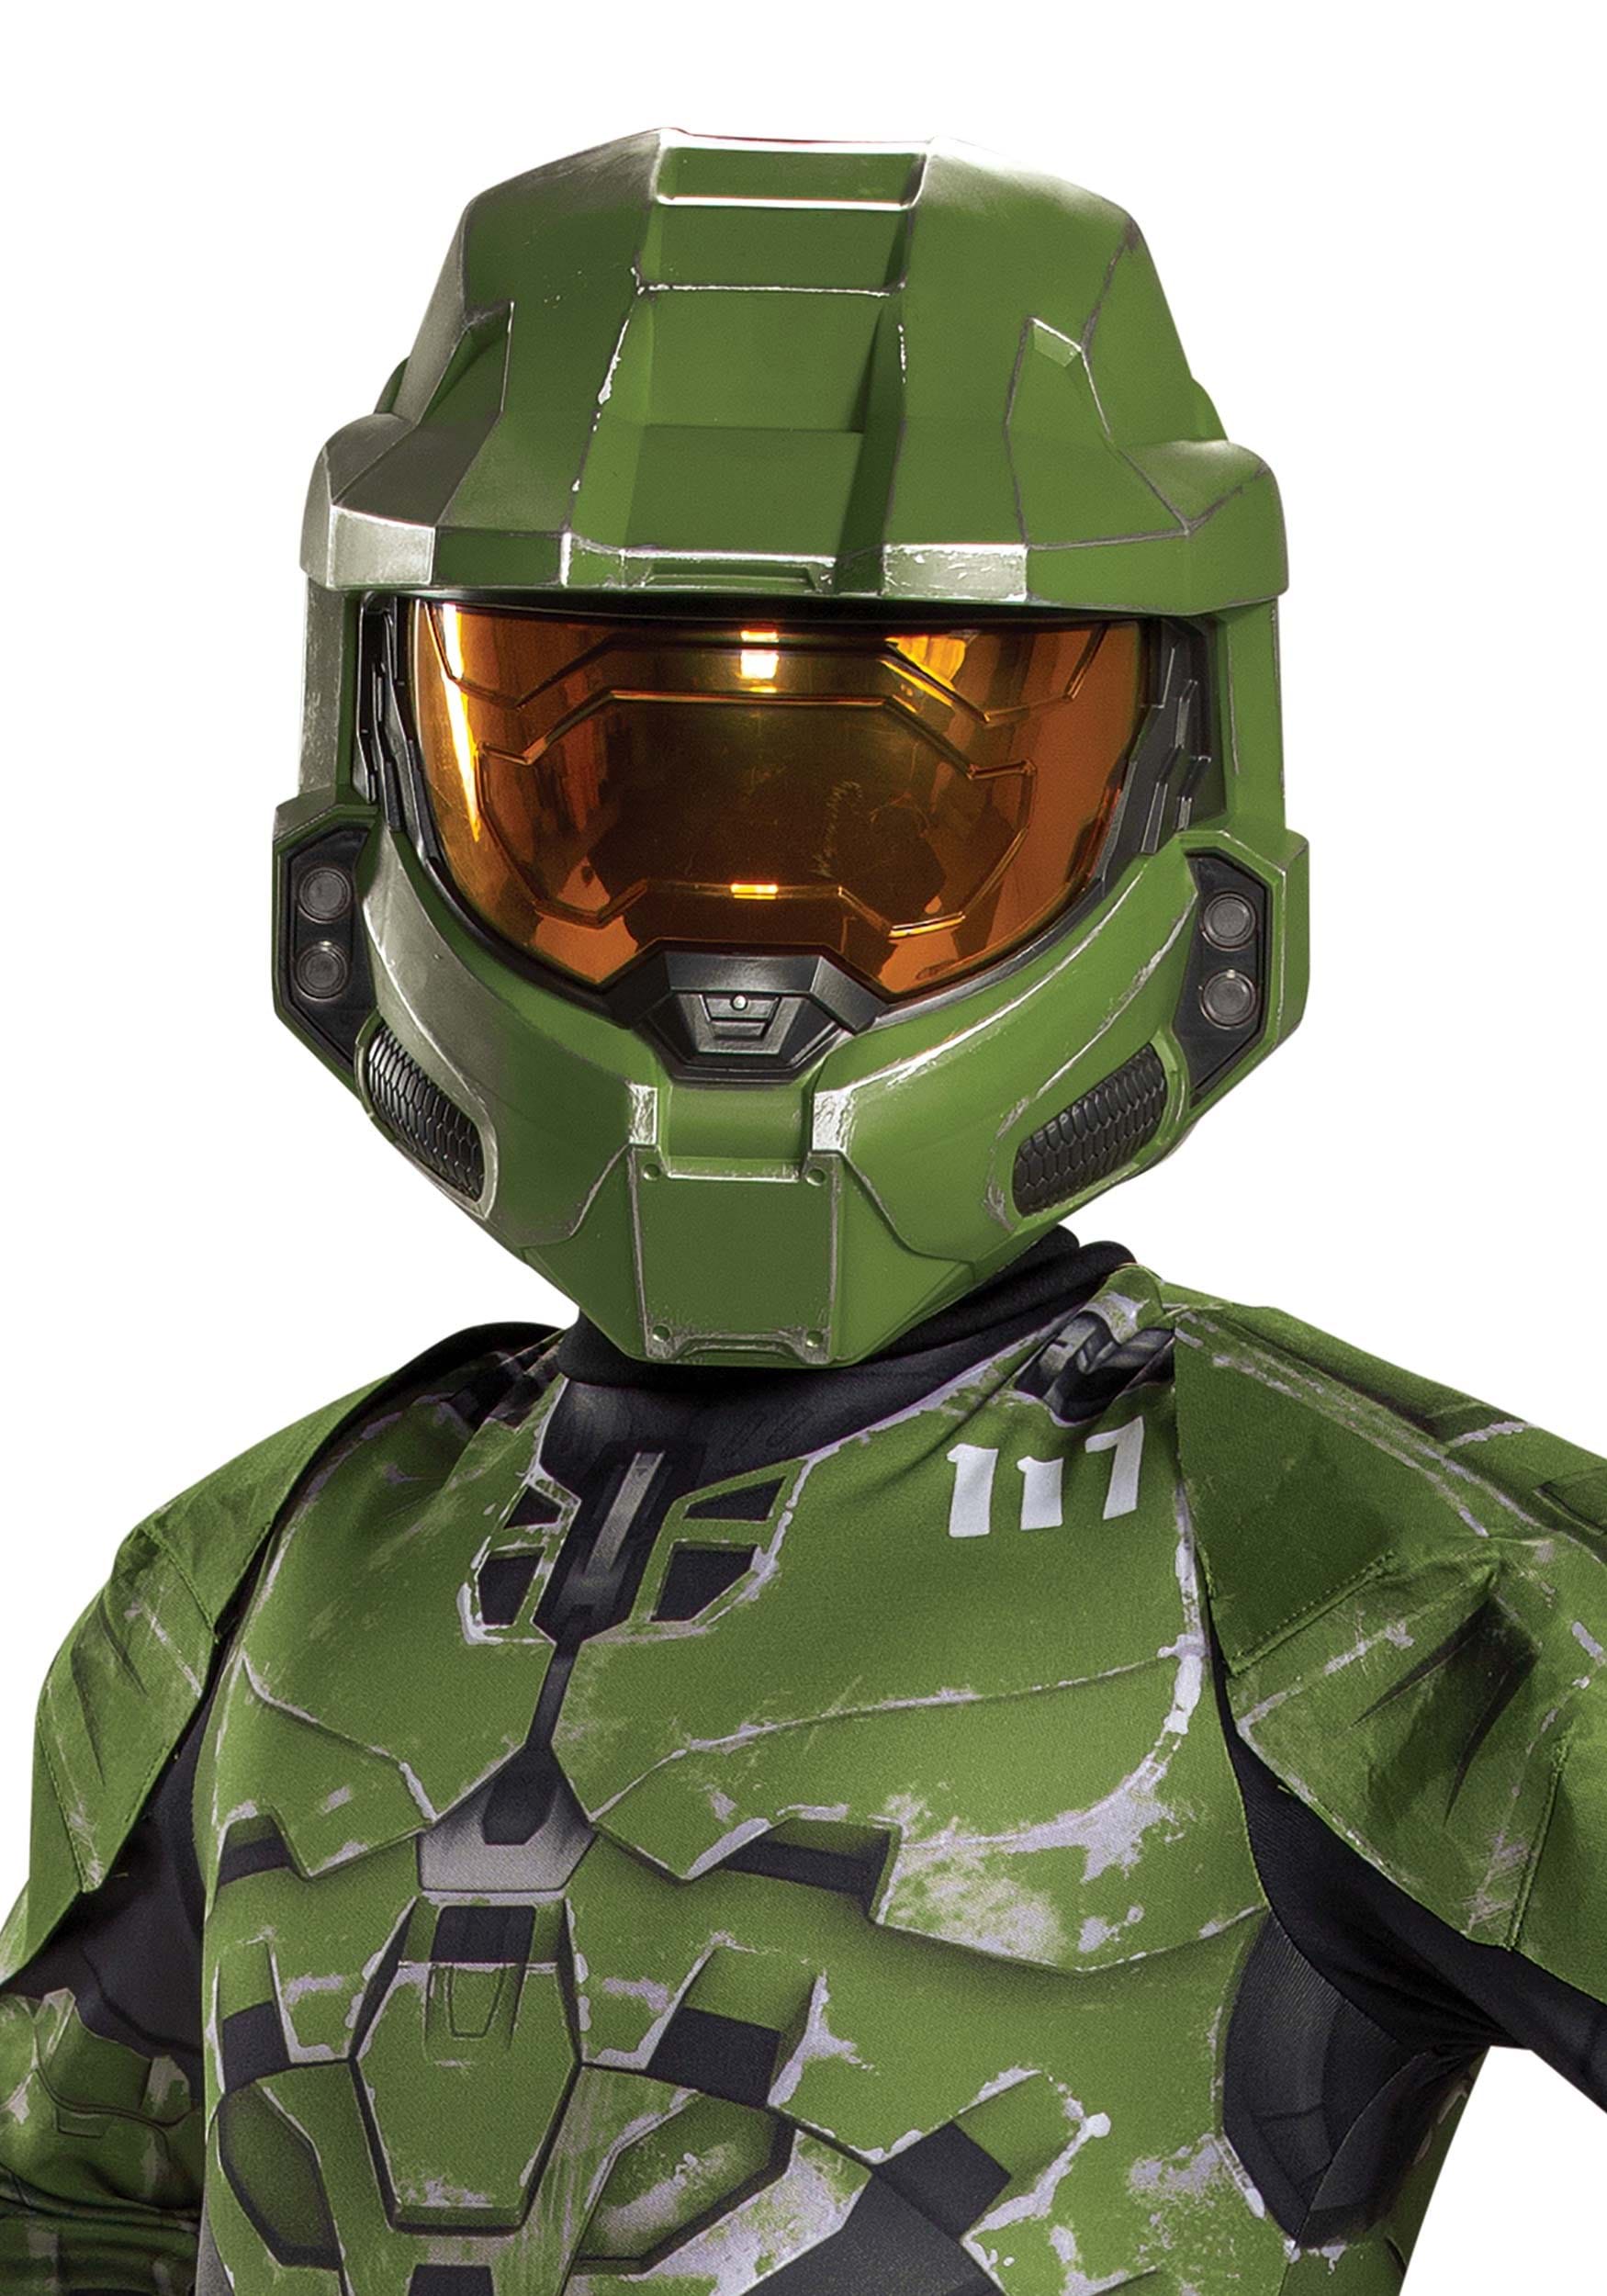 NWT Youth Sz S 4-6 Halloween Halo Master Chief Costume With Mask - www ...